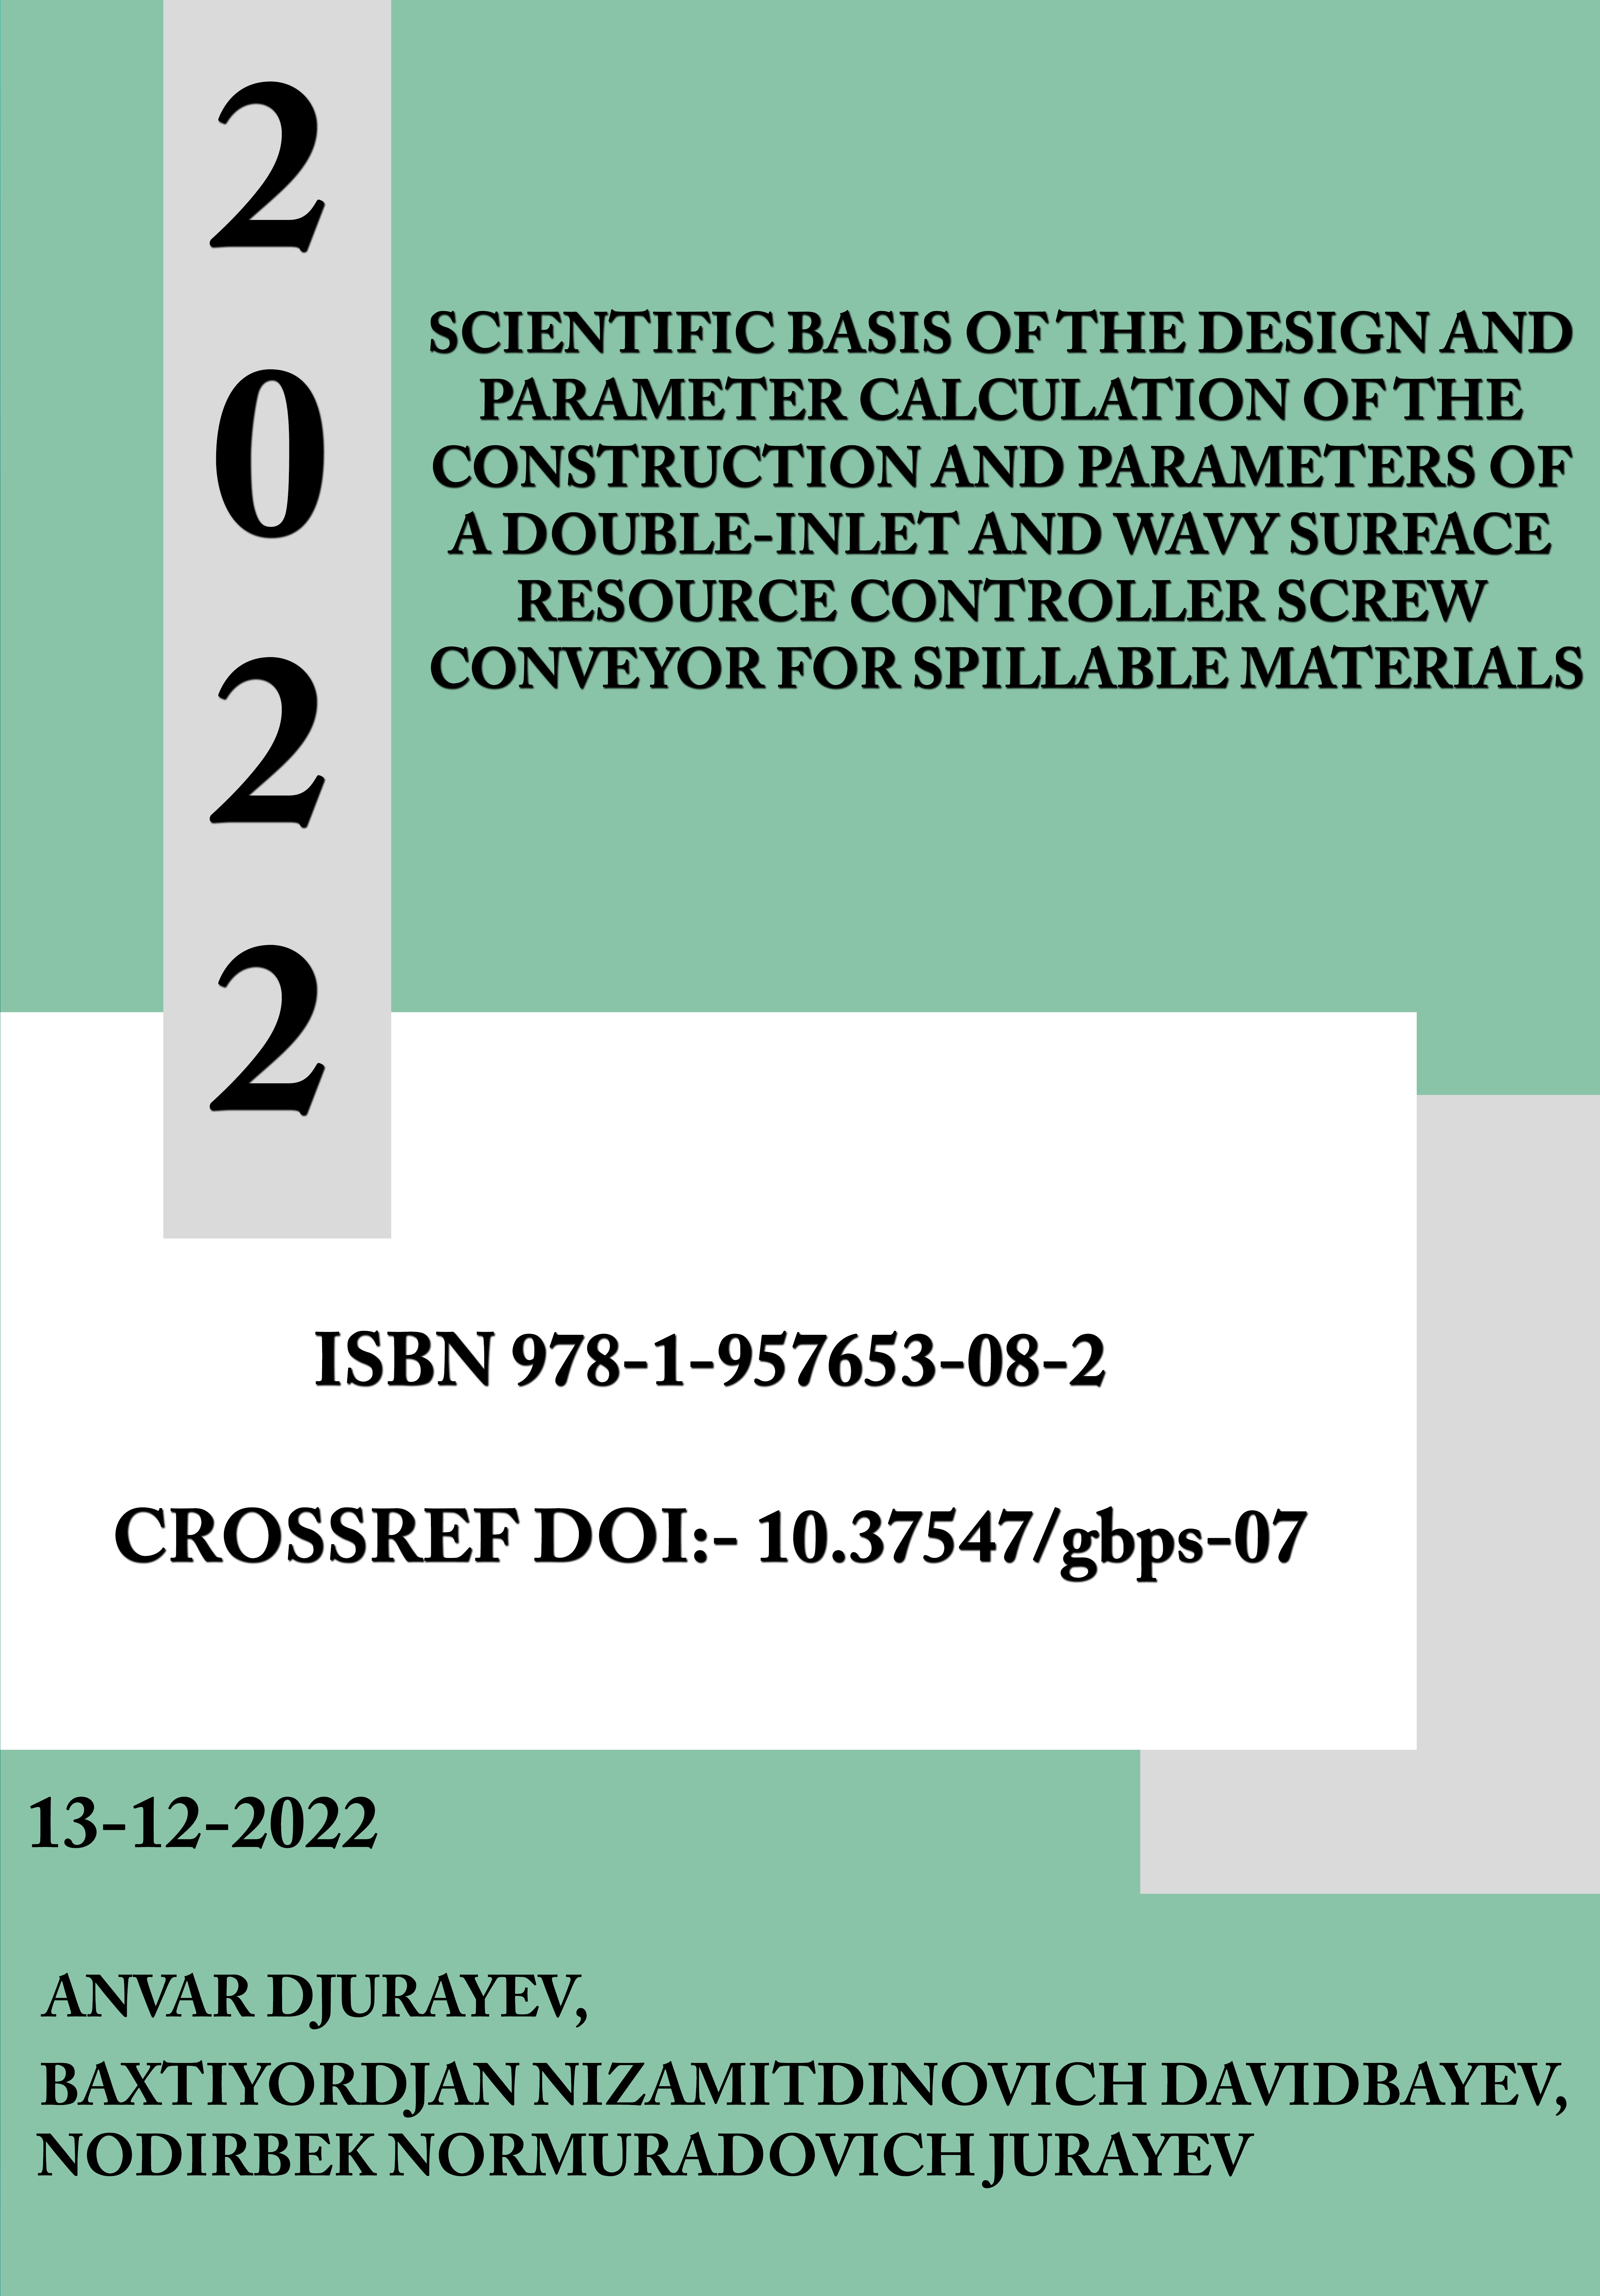 					View SCIENTIFIC BASIS OF THE DESIGN AND PARAMETER CALCULATION OF THE CONSTRUCTION AND PARAMETERS OF A DOUBLE-INLET AND WAVY SURFACE RESOURCE CONTROLLER SCREW CONVEYOR FOR SPILLABLE MATERIALS
				